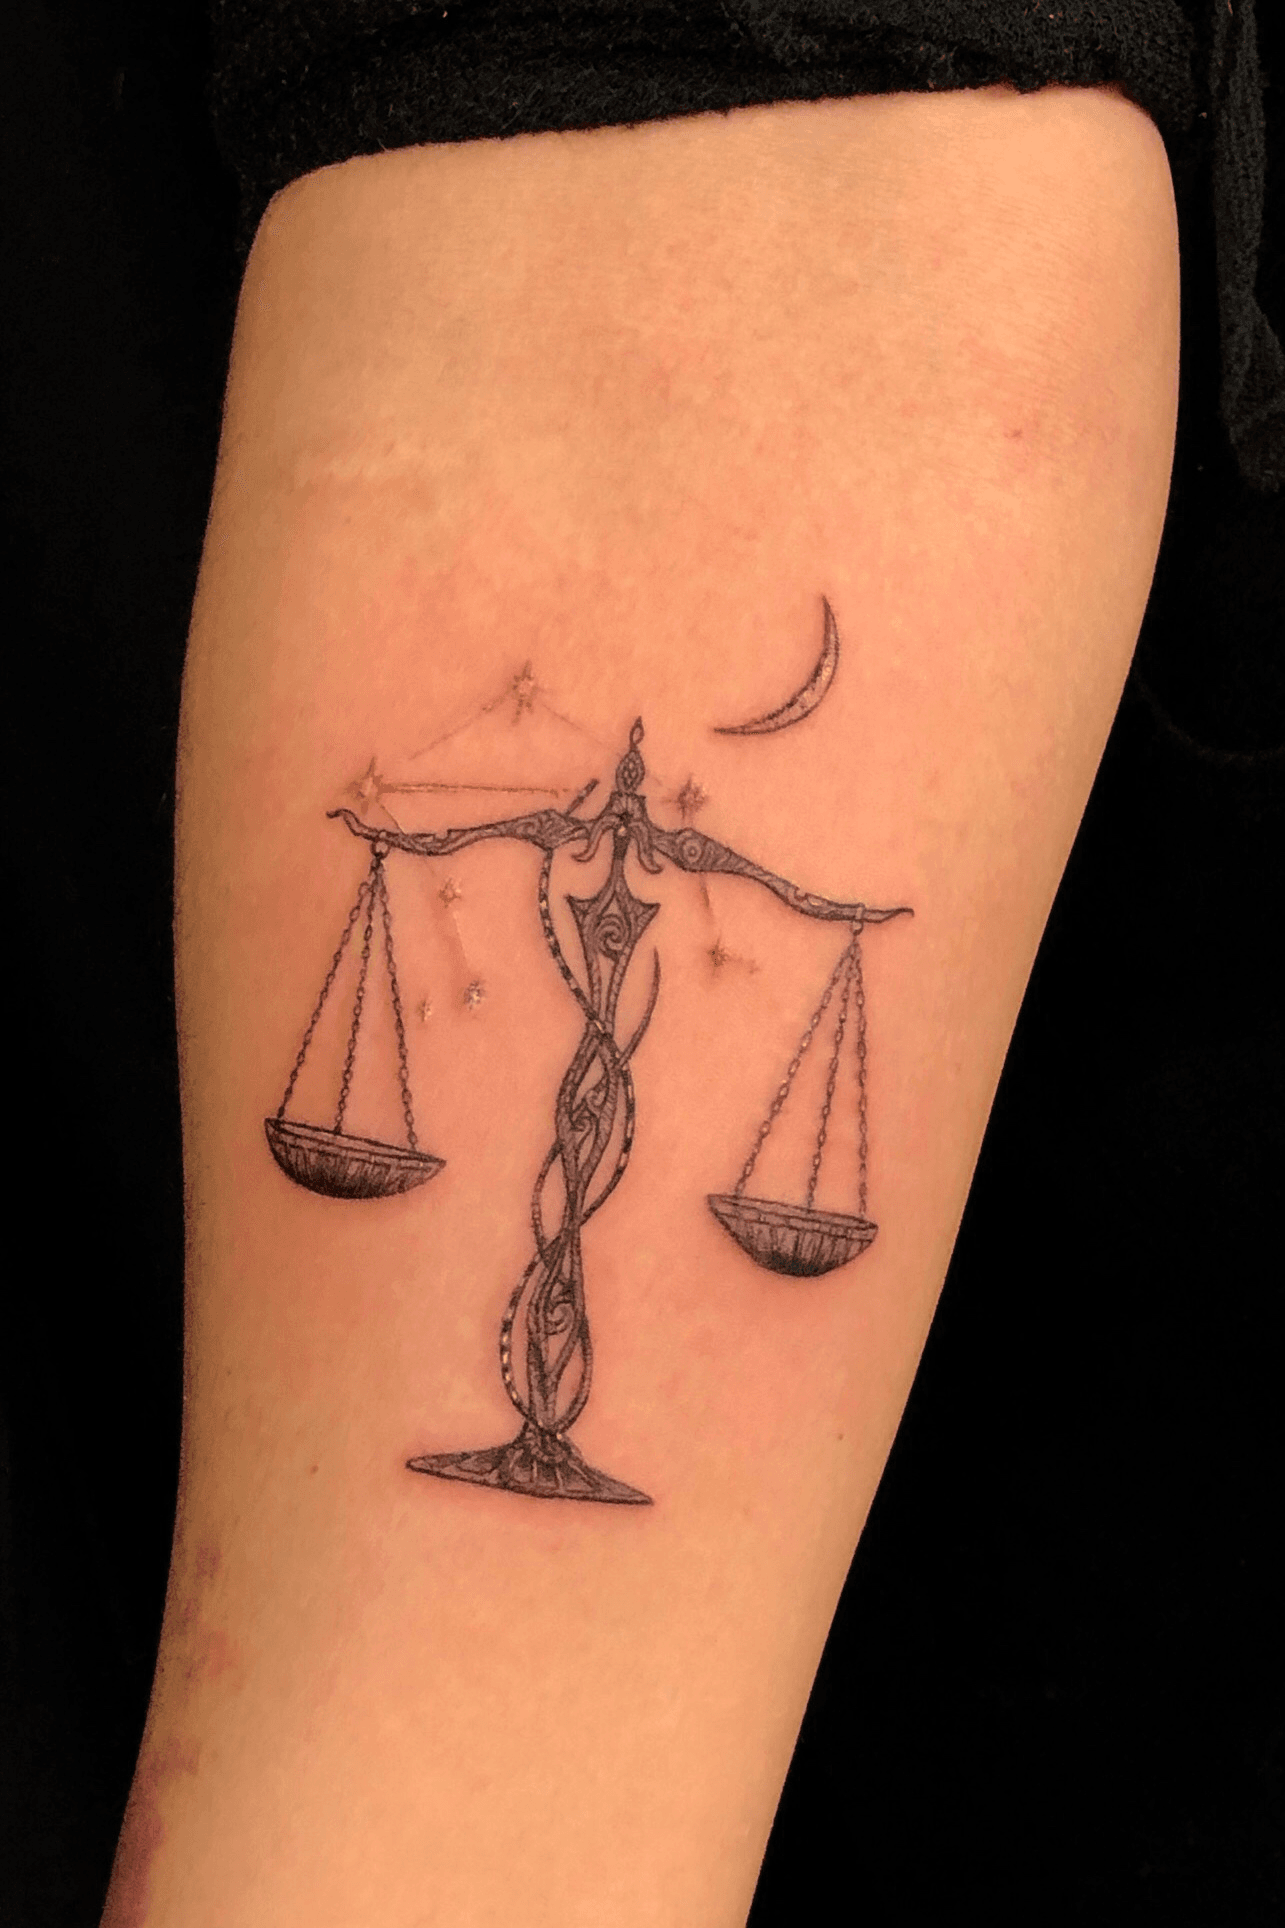 Tattoo uploaded by Keef Meccah • Libra Scale with constellation